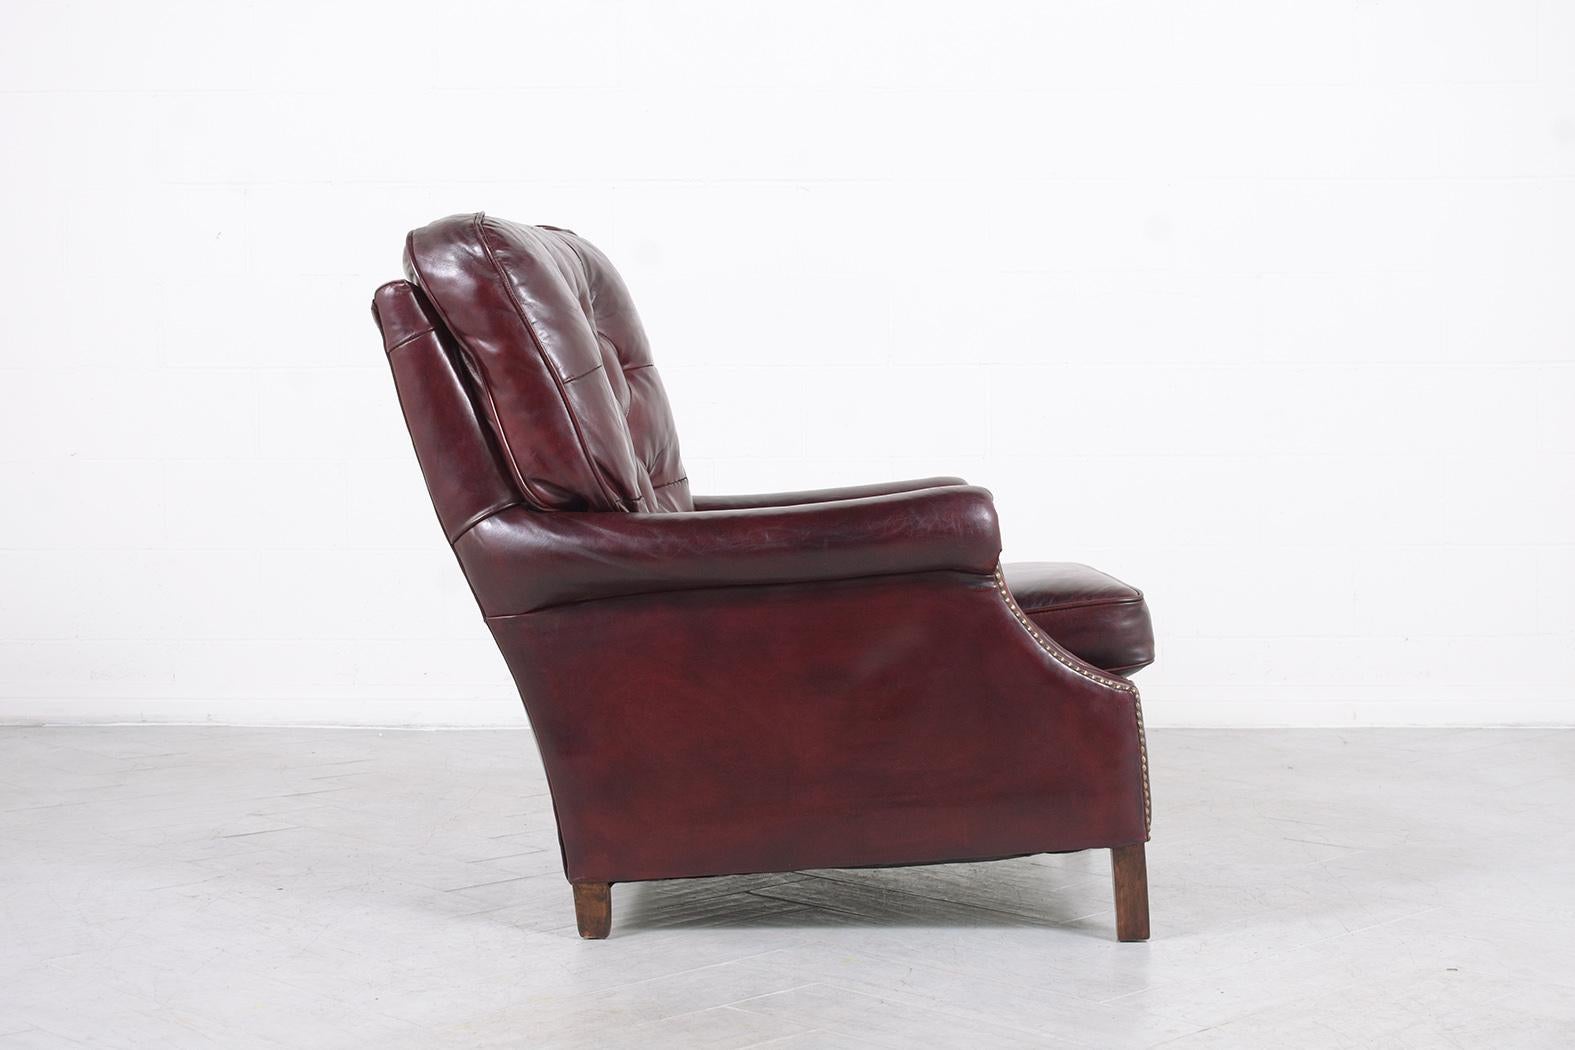 Mid-20th Century Antique English Chesterfield Lounge Chair: Cordovan Red Leather Tufted Design For Sale